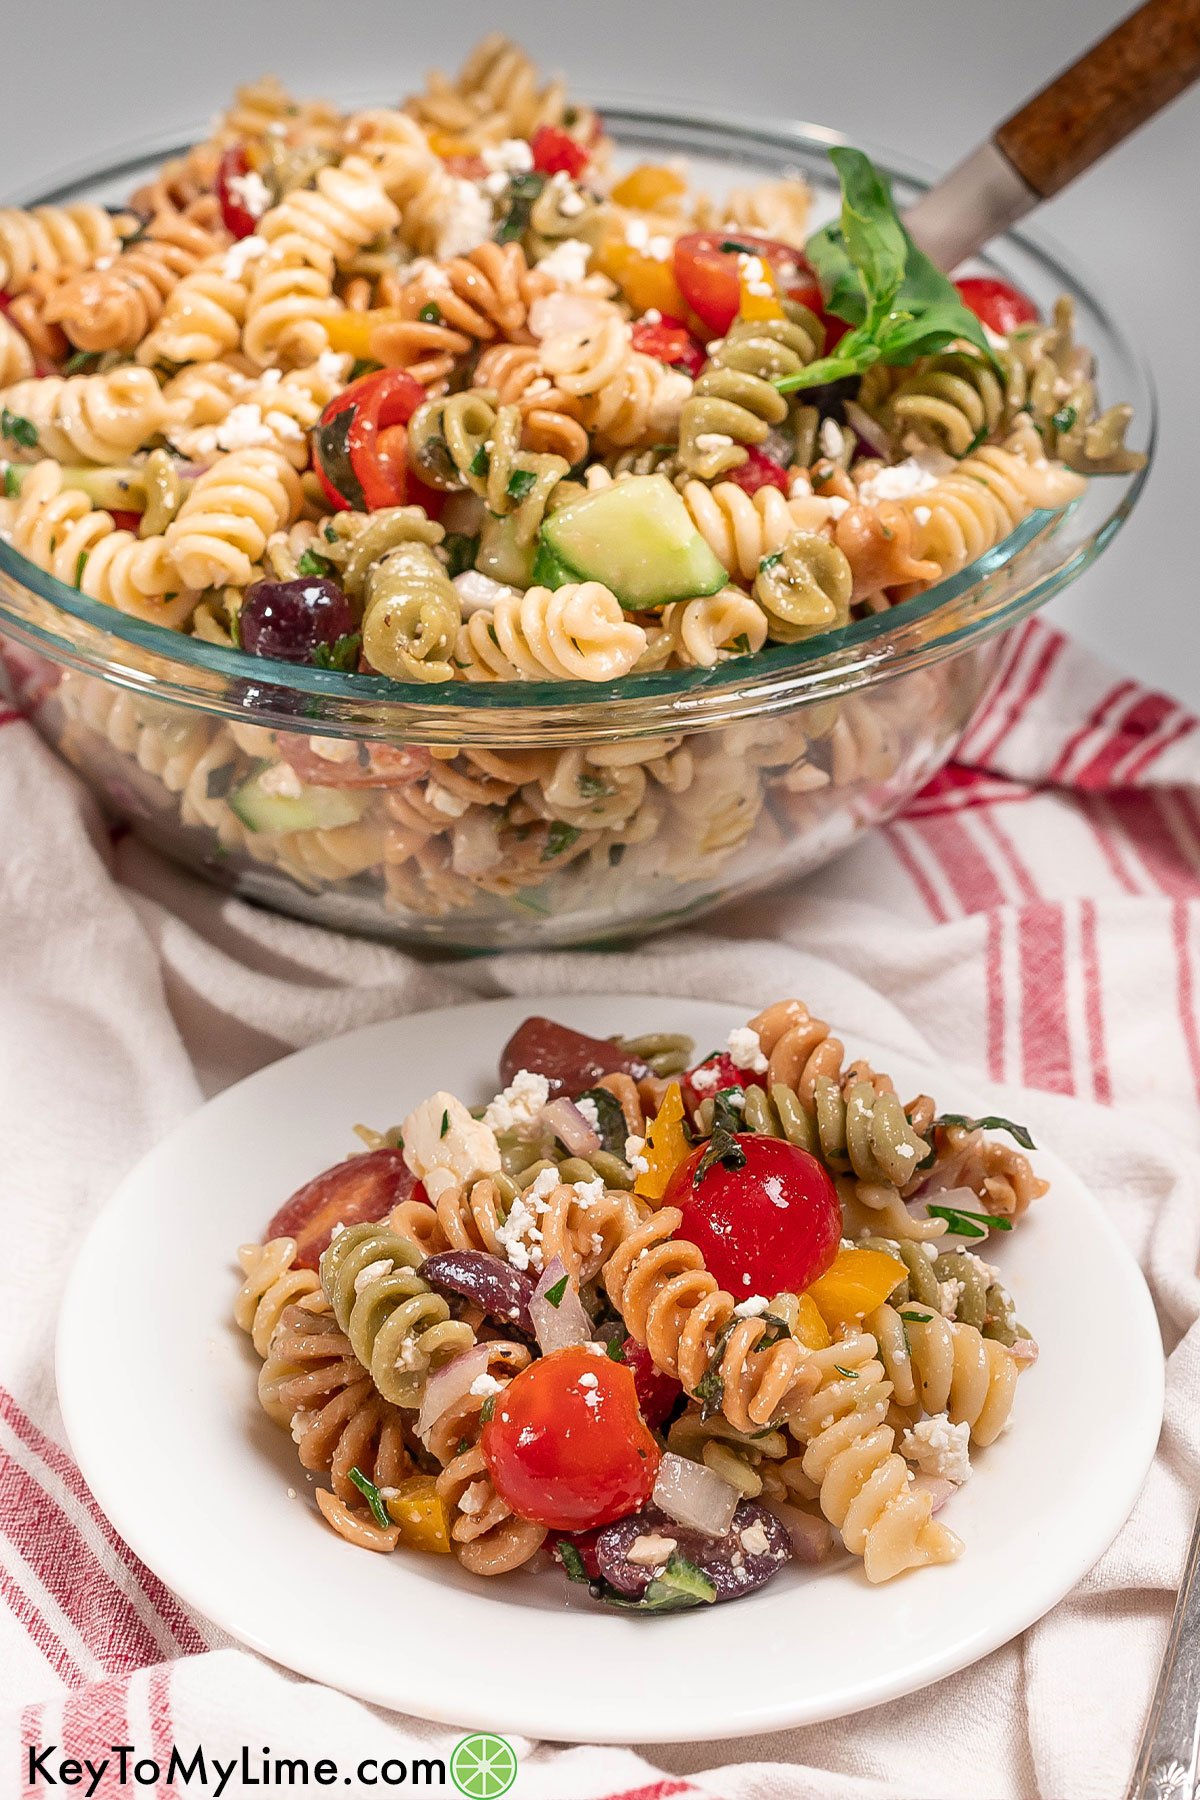 A refreshing cold pasta salad with fresh vegetables throughout garnished with basil.